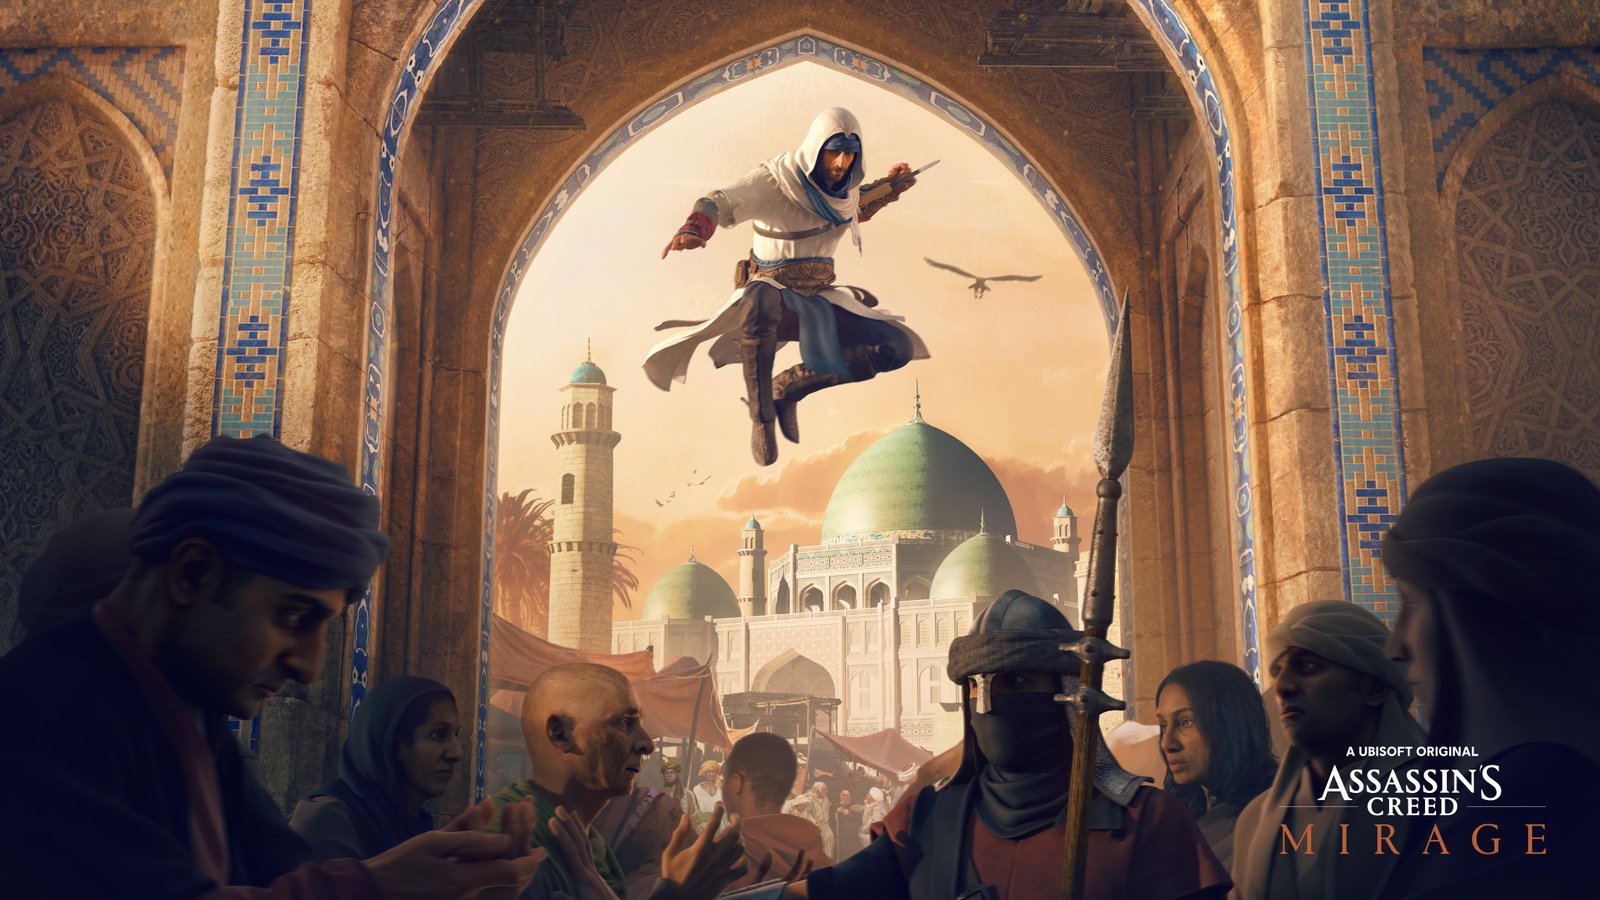 An assassin wearing a hood and wielding a dagger, leaping over a crowd.